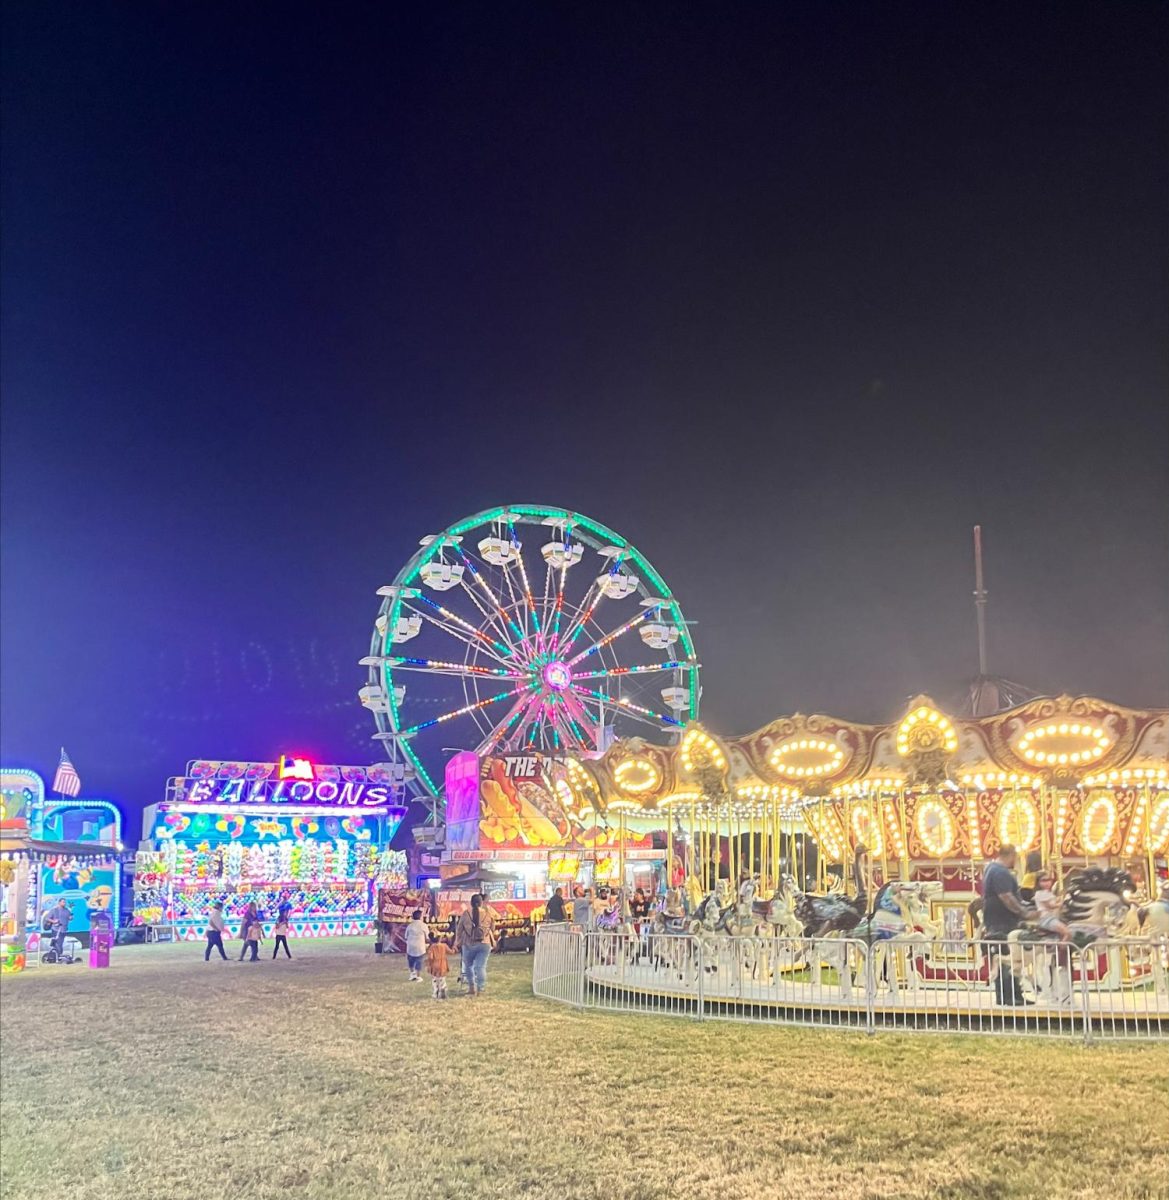 “Treat Yourself” to the Kern County Fair this year